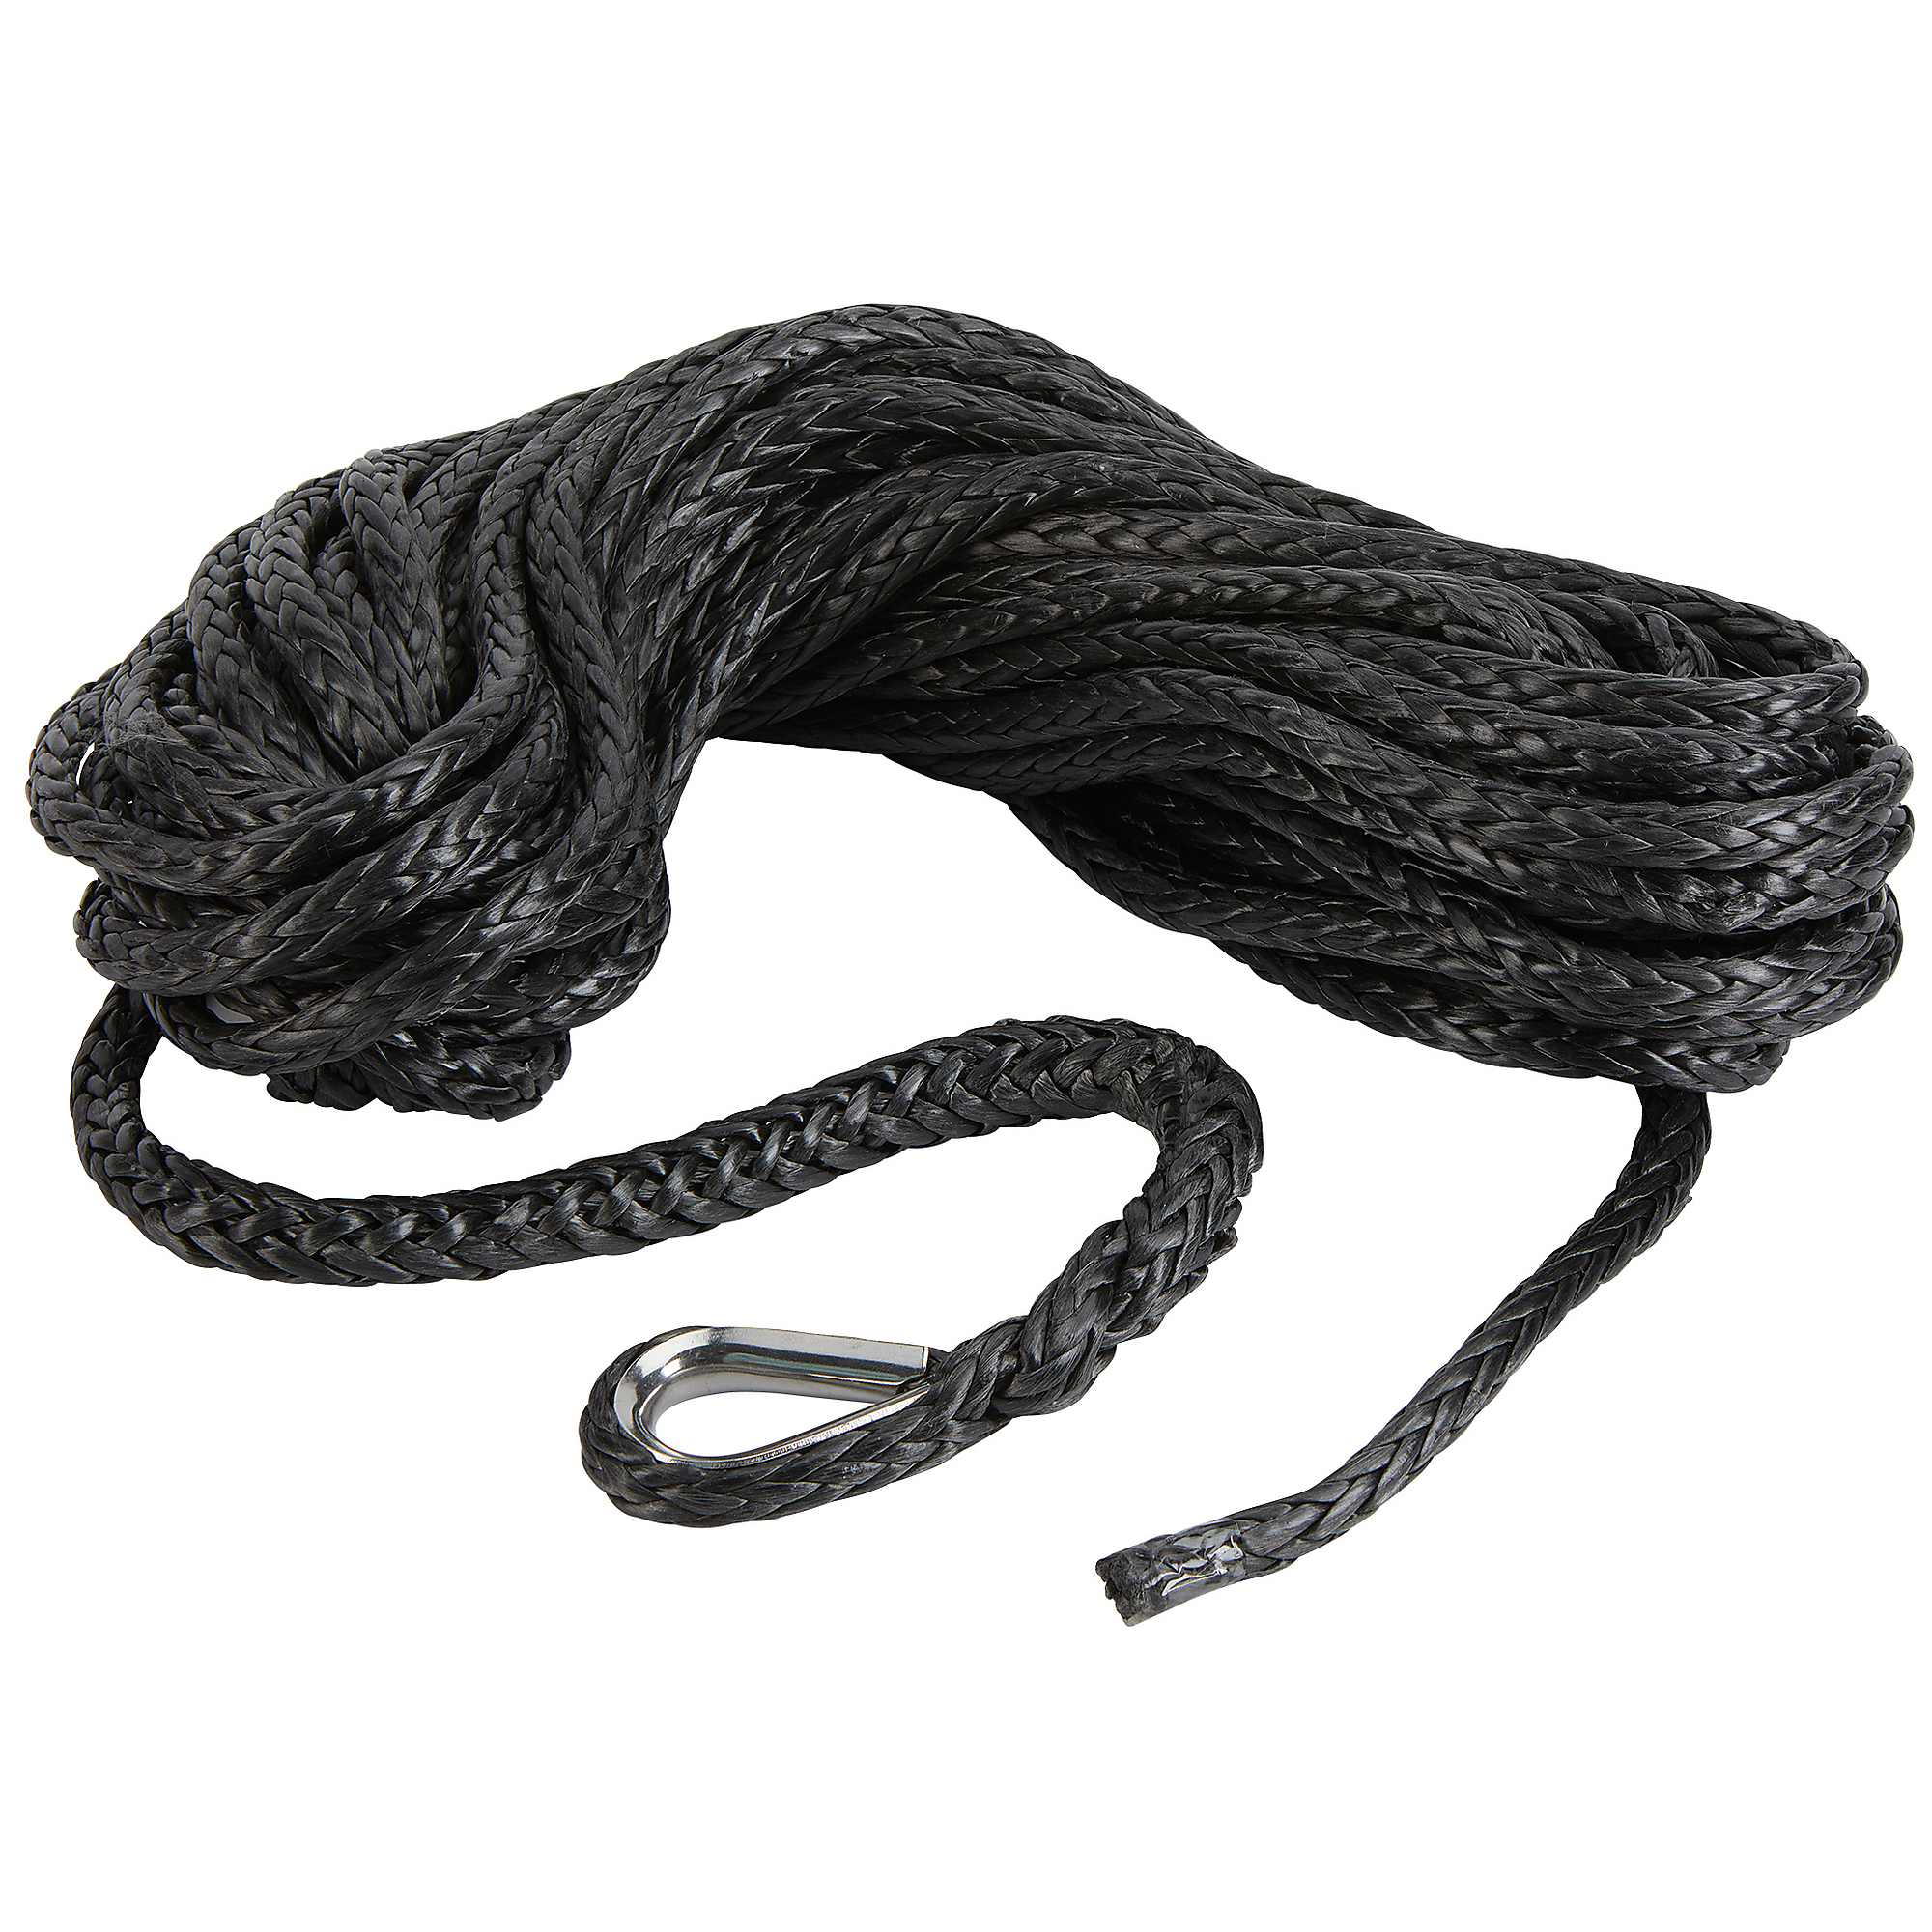 Ultra-Tow Synthetic Winch Rope, 3/8Inch Diameter x 82ft.L, for Use with Winches Up to 12,000-Lbs., Model 5.06.82.03